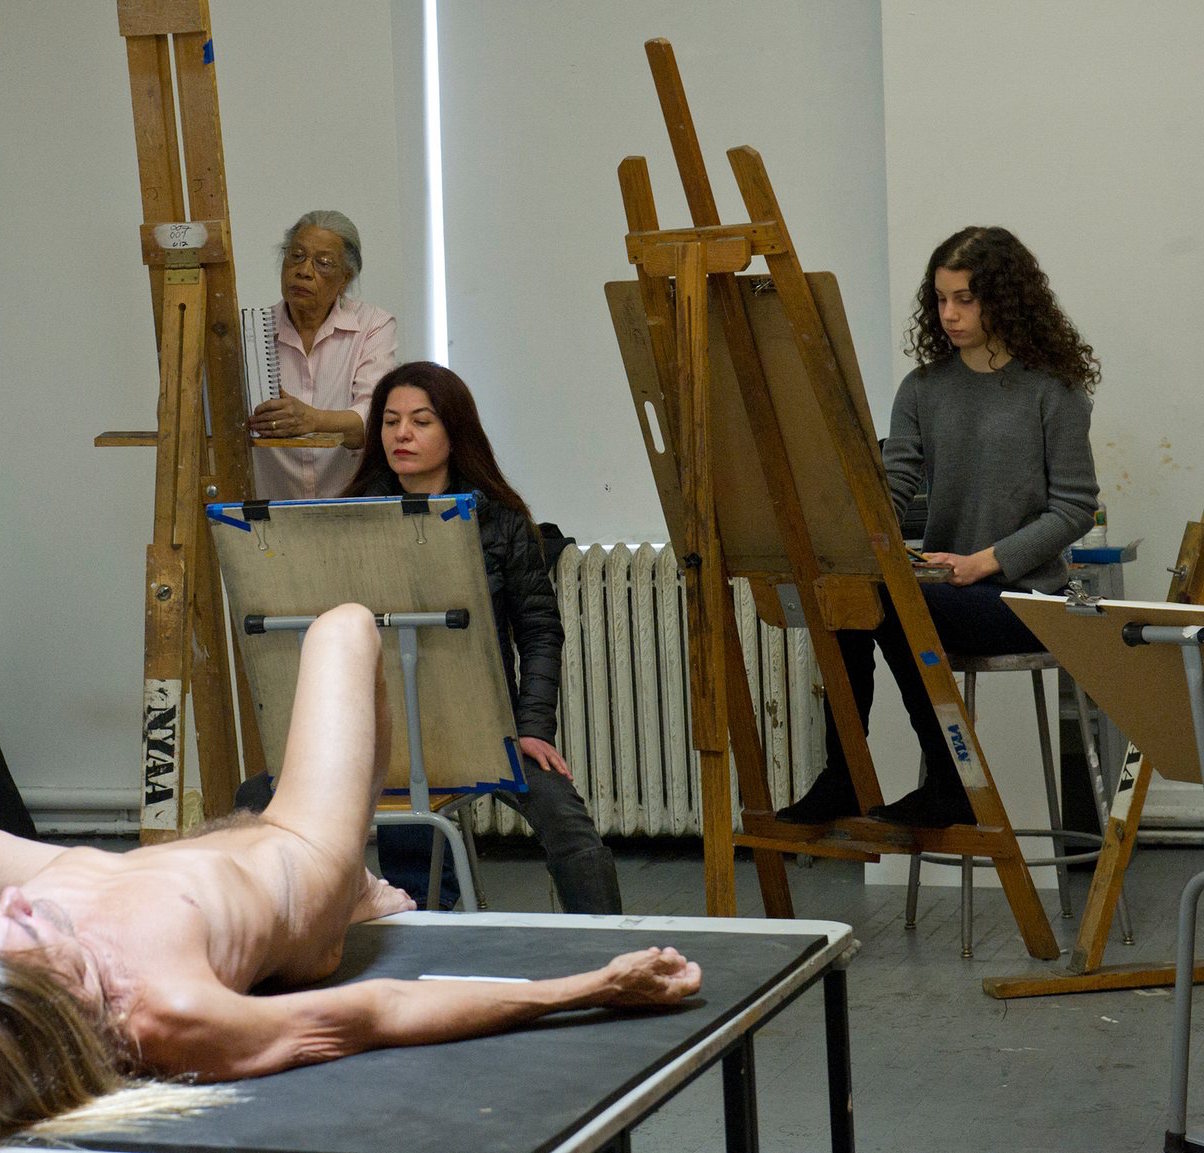 Iggy Pop poses naked for Jeremy Deller exhibition